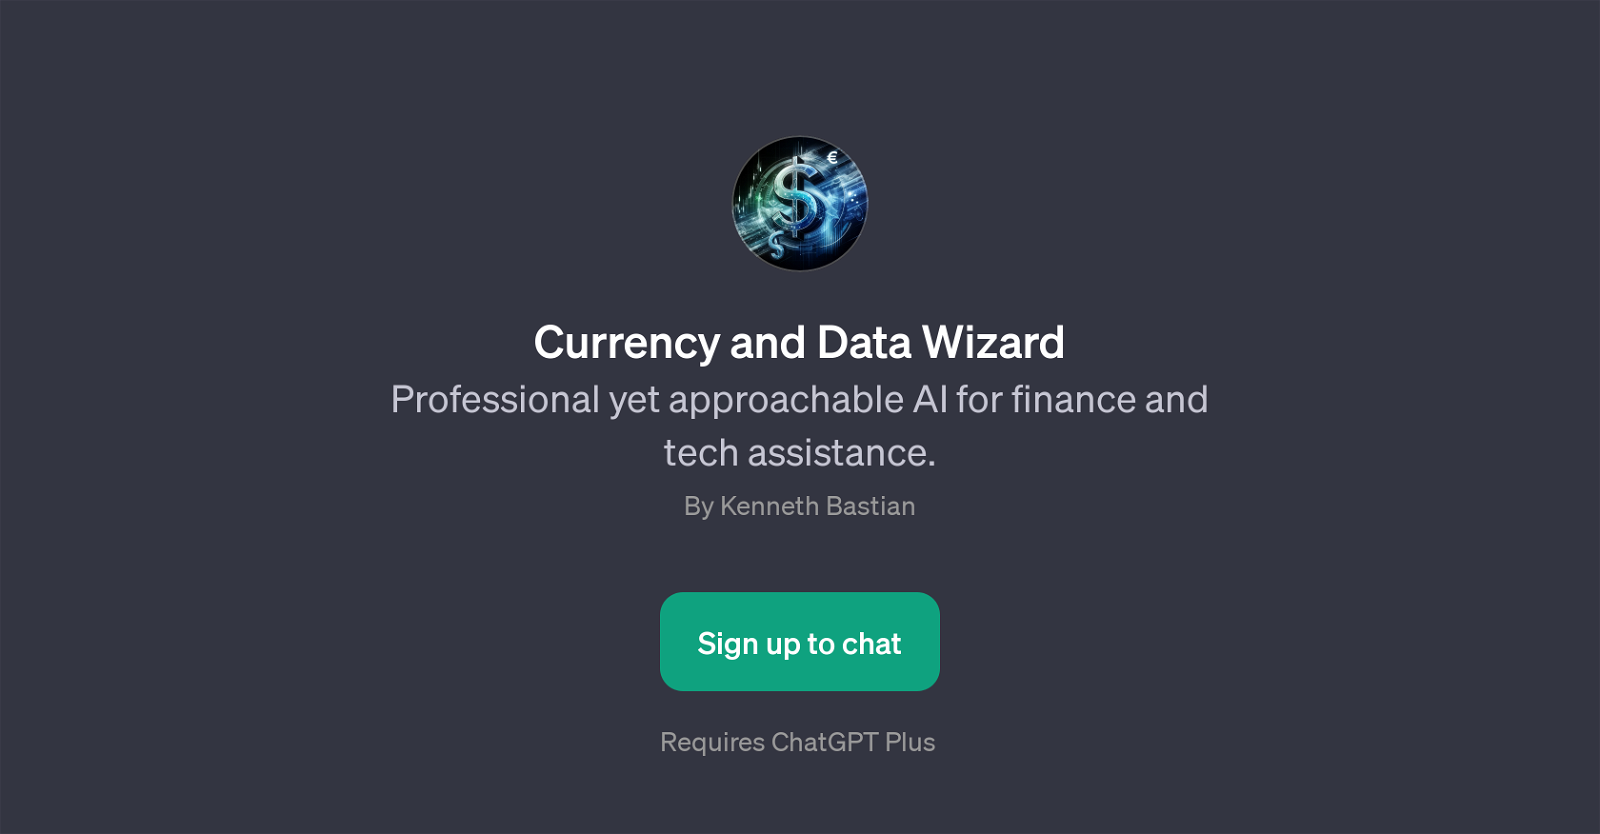 Currency and Data Wizard website